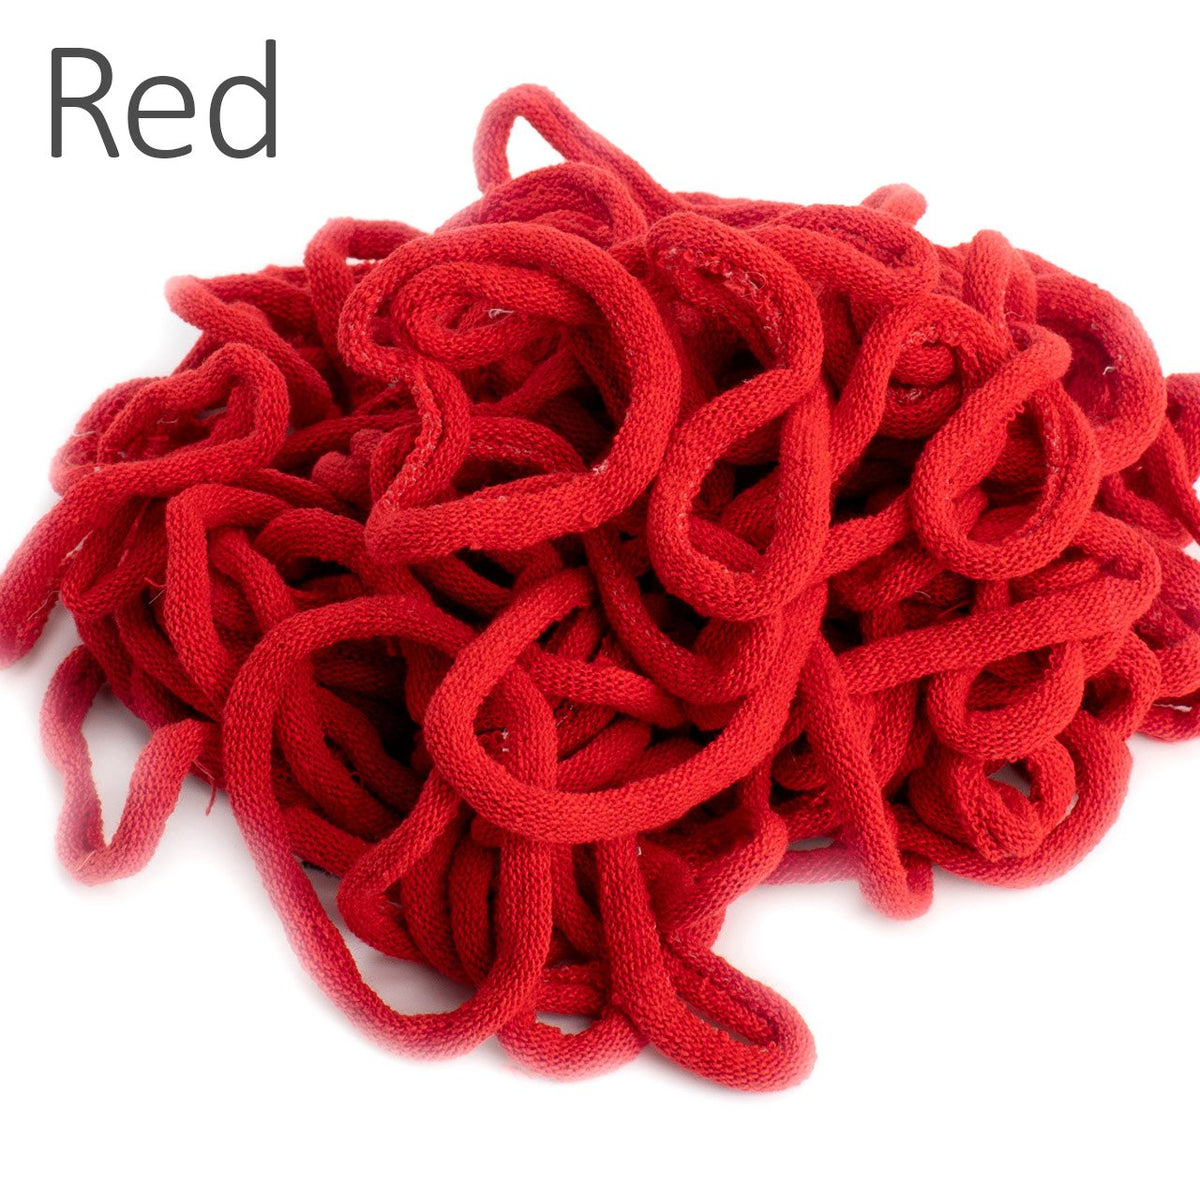 Premium Cotton Rope & String – Lots of Knots Canada